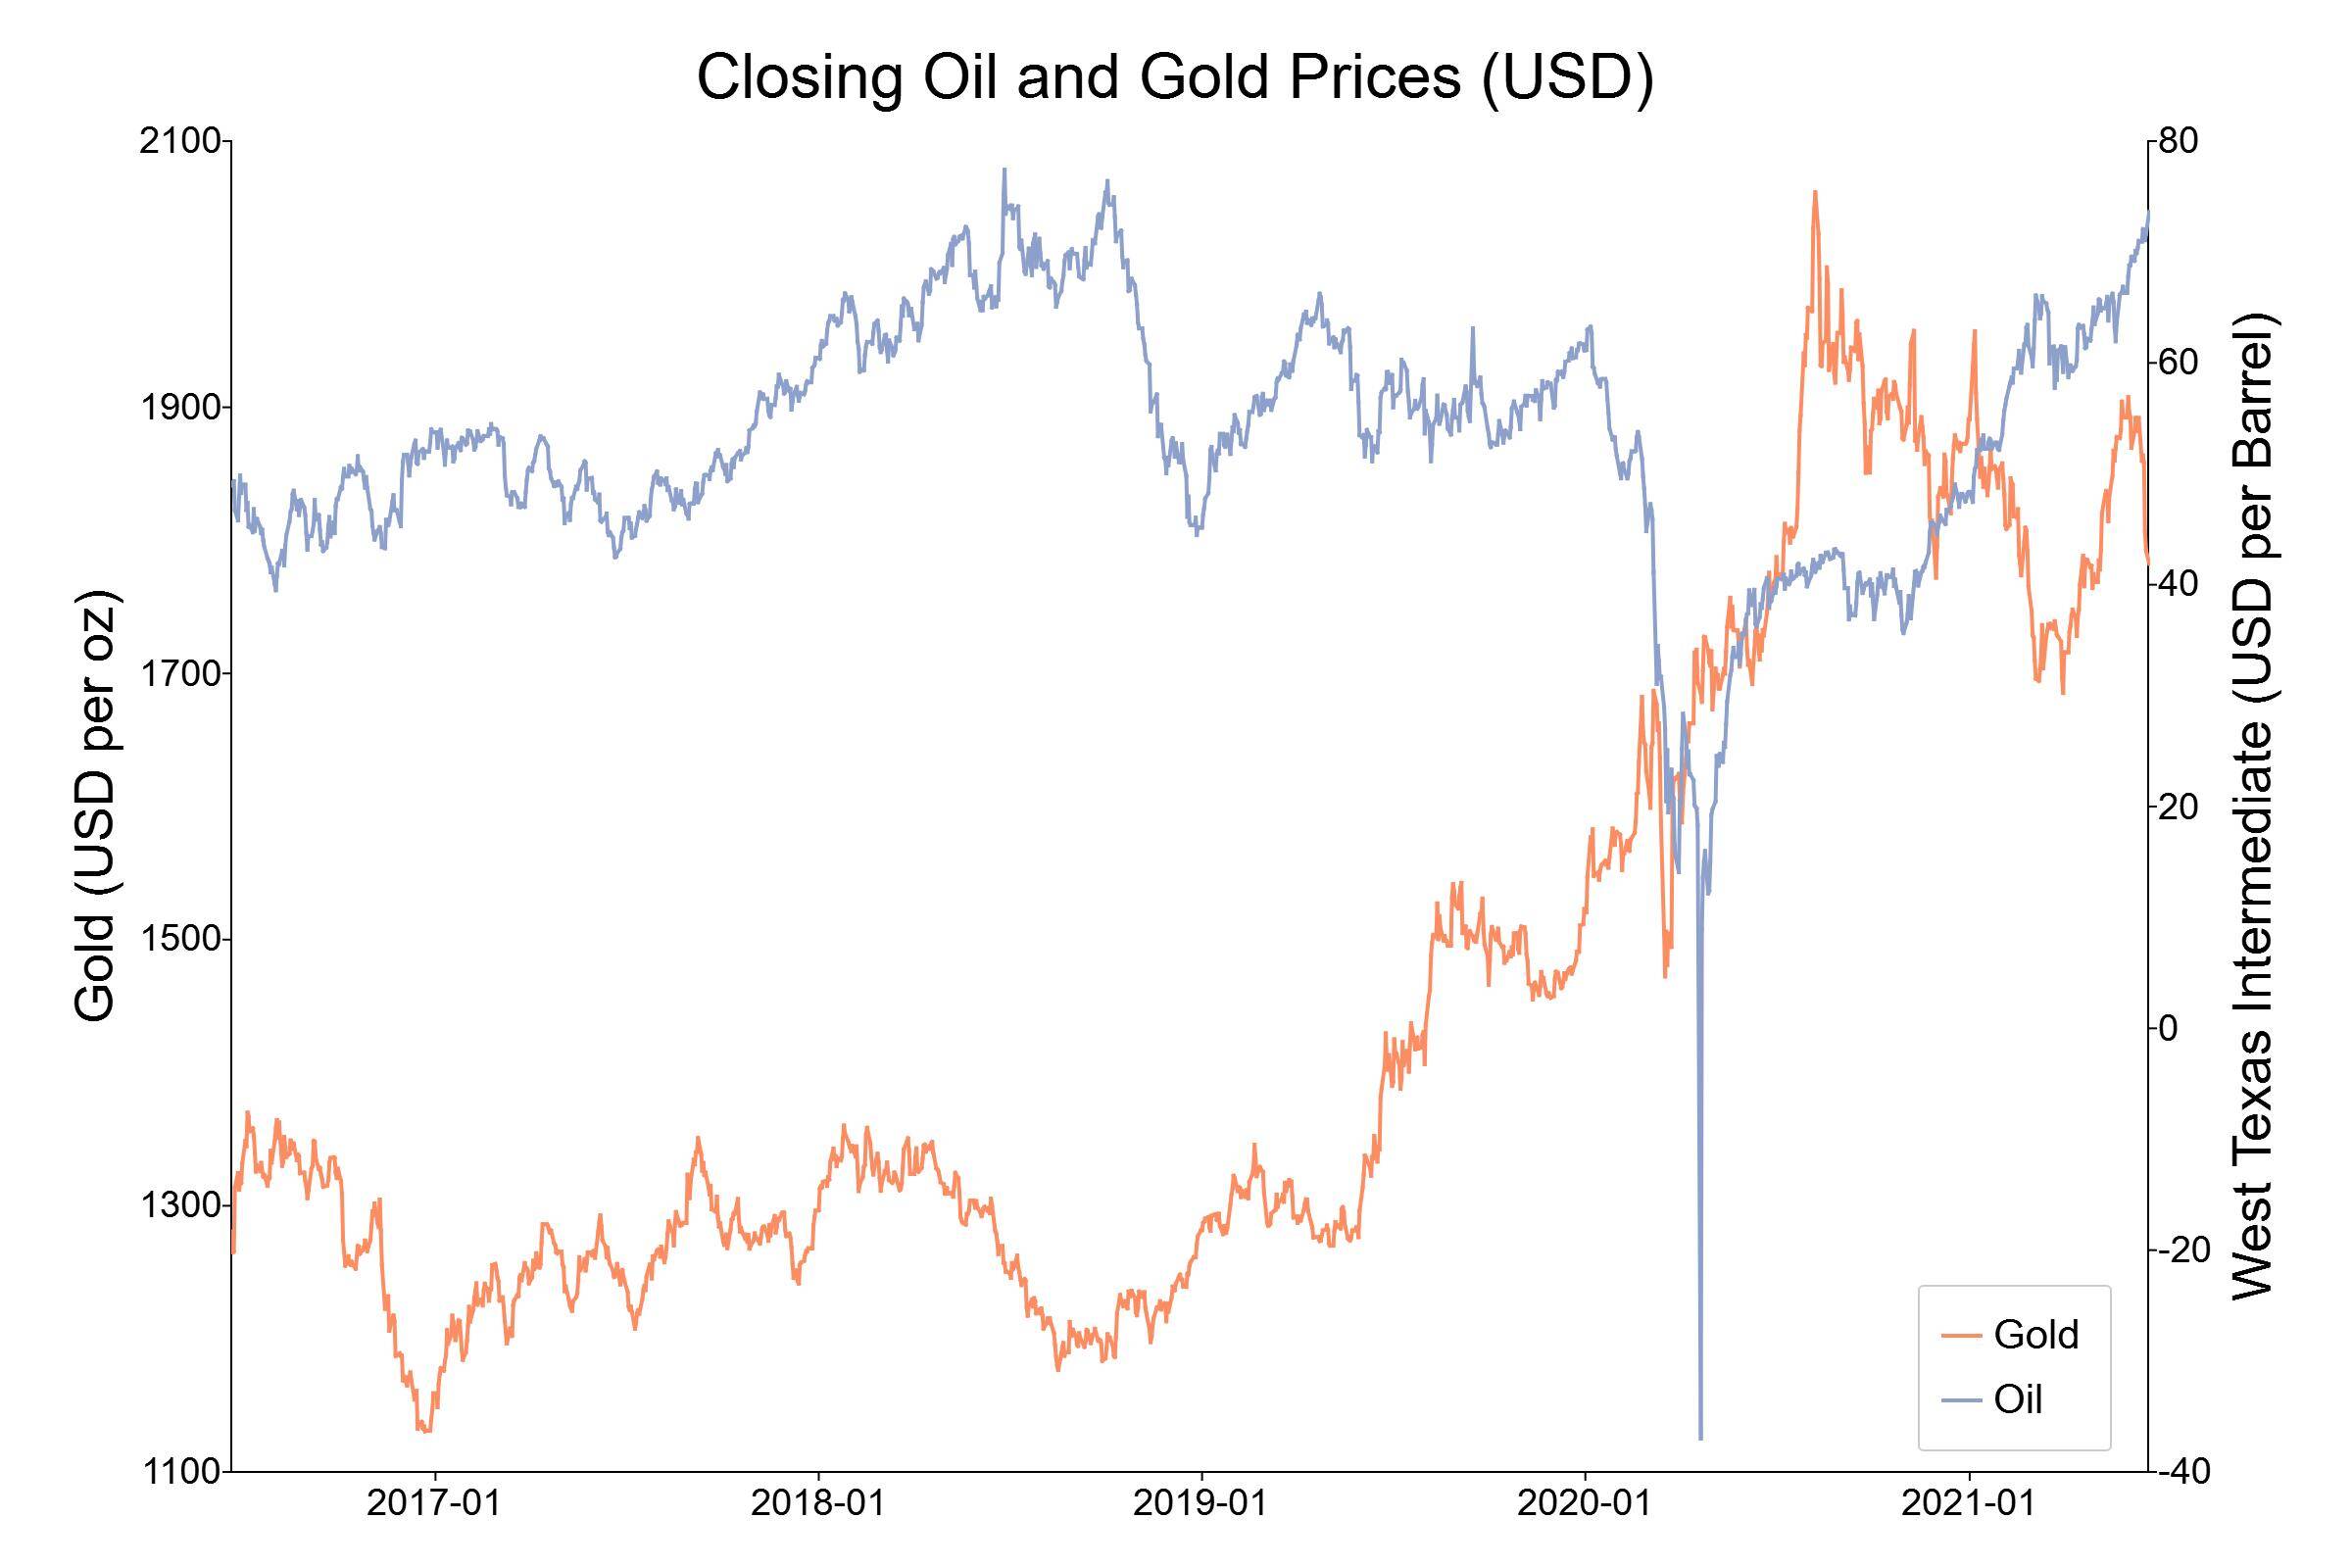 Time series plot of oil and gold prices